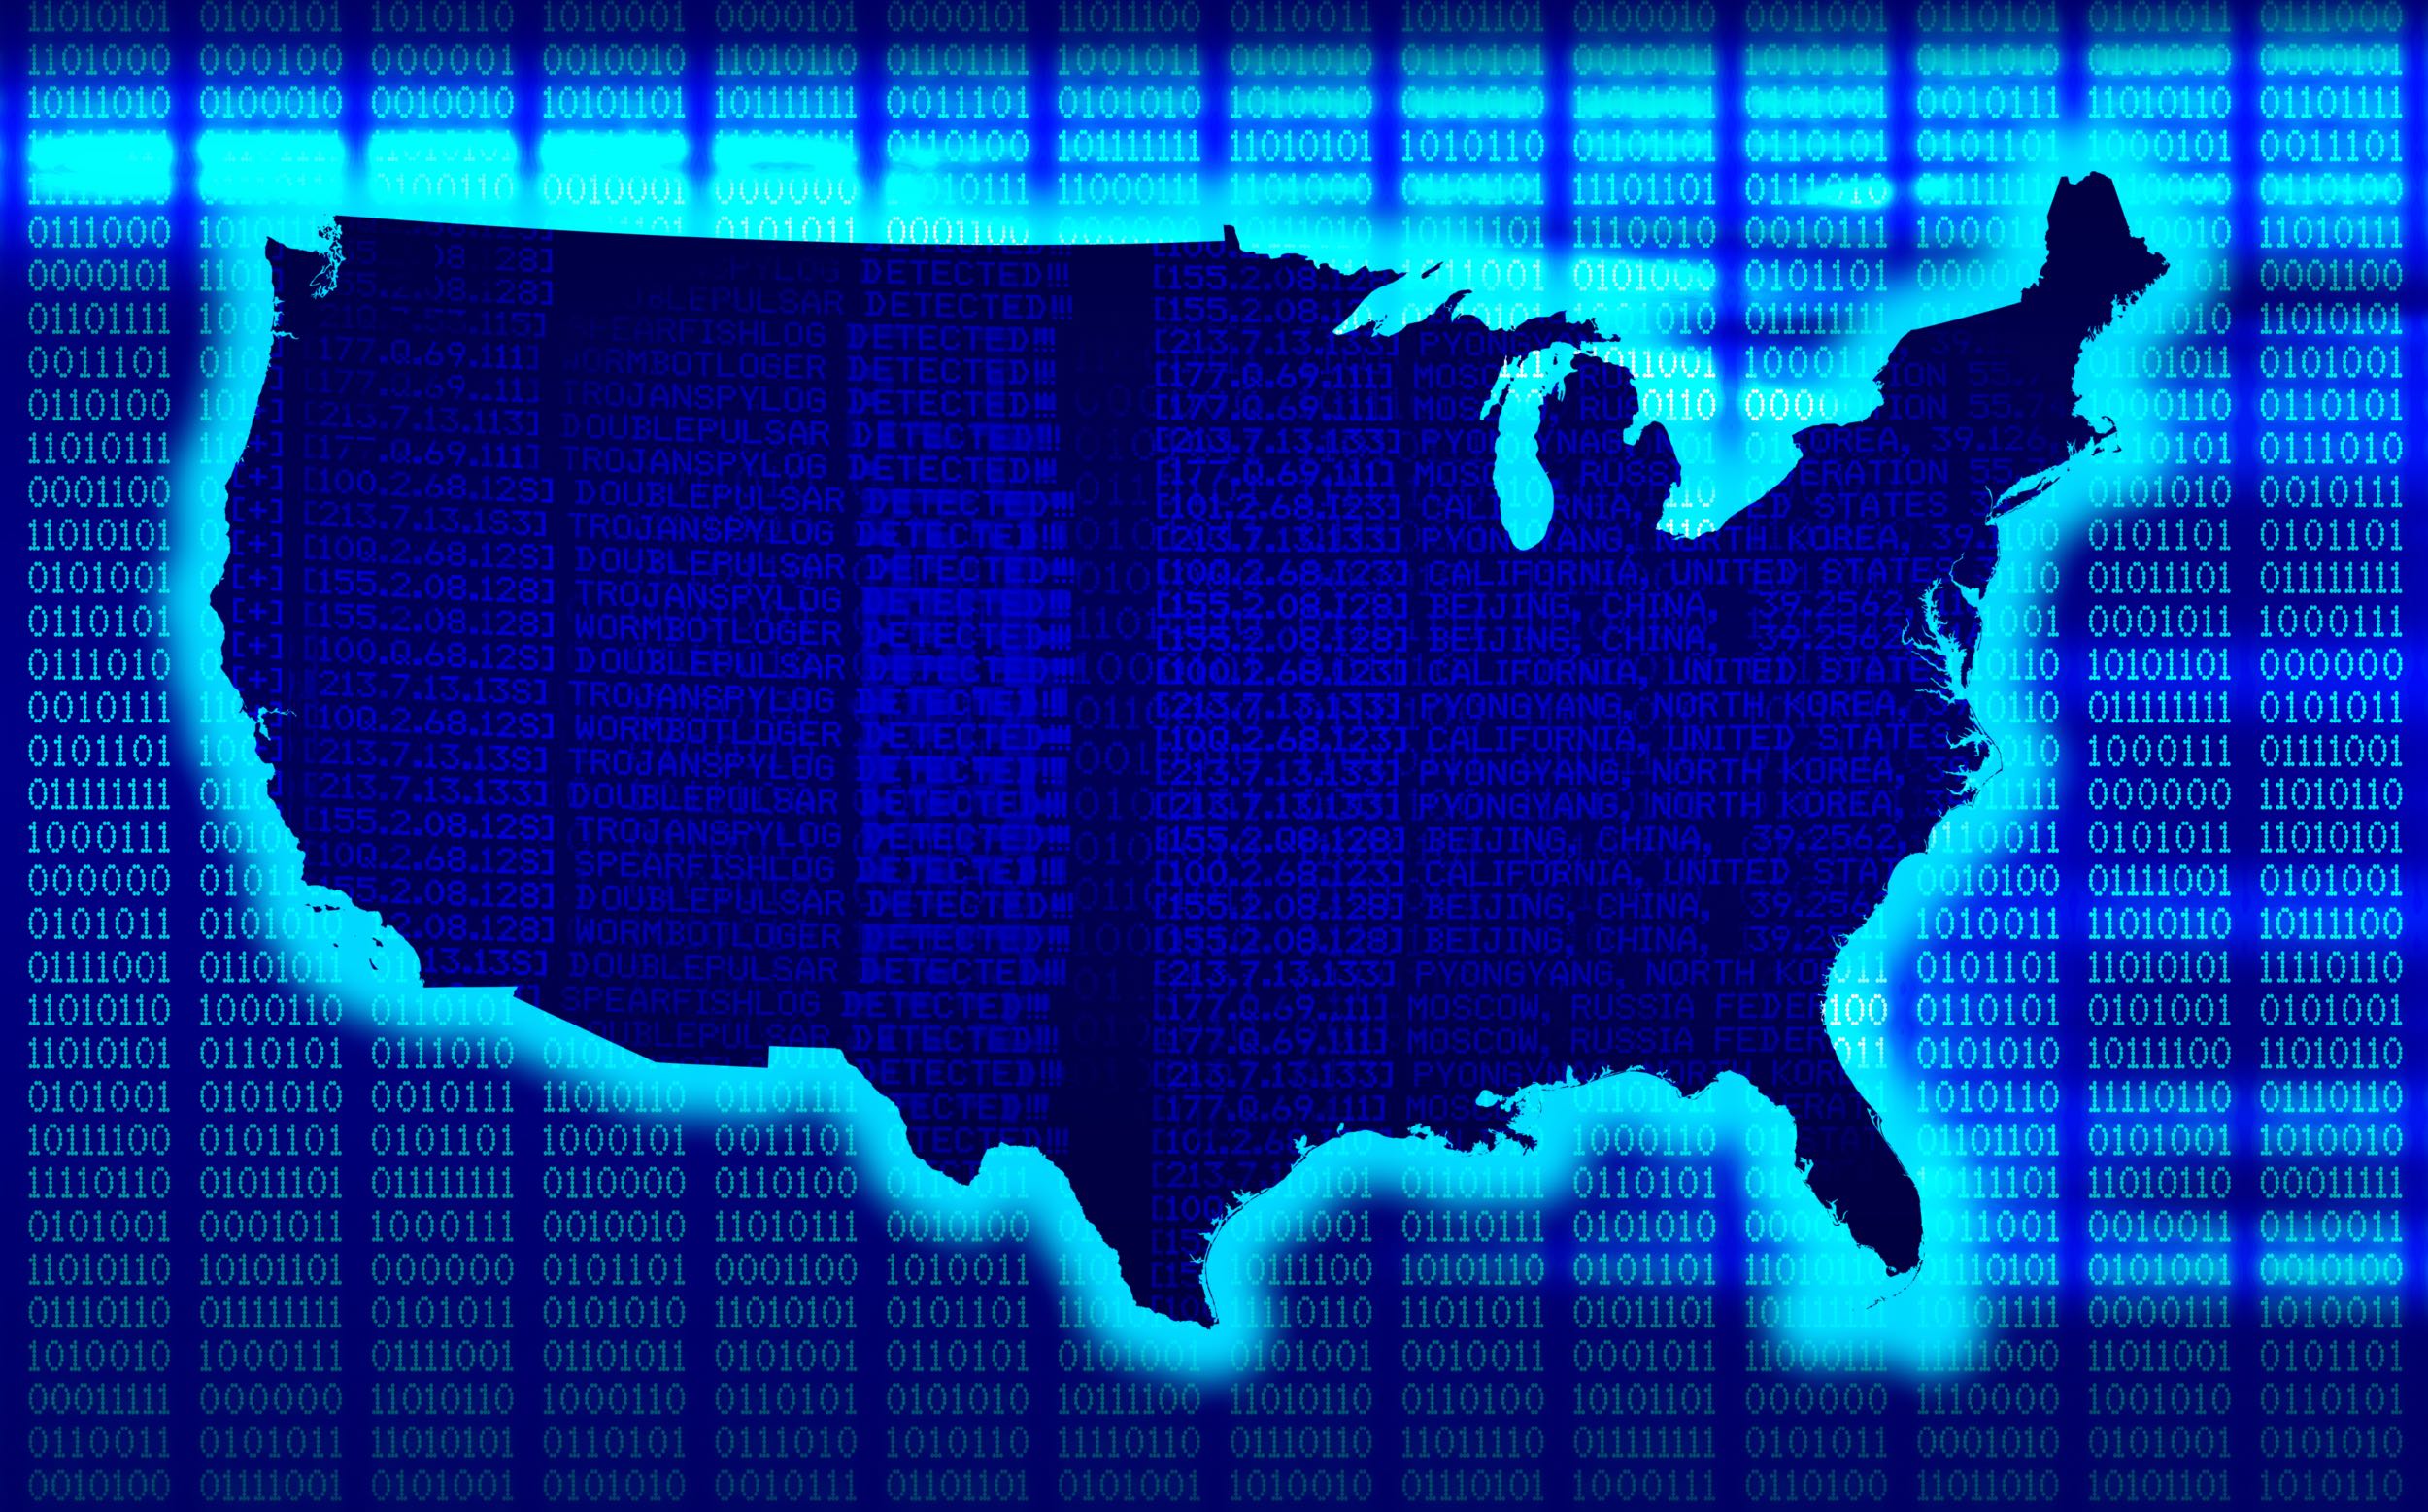 Fcc Has Obtained Detailed Broadband Maps From Isps For The First Time